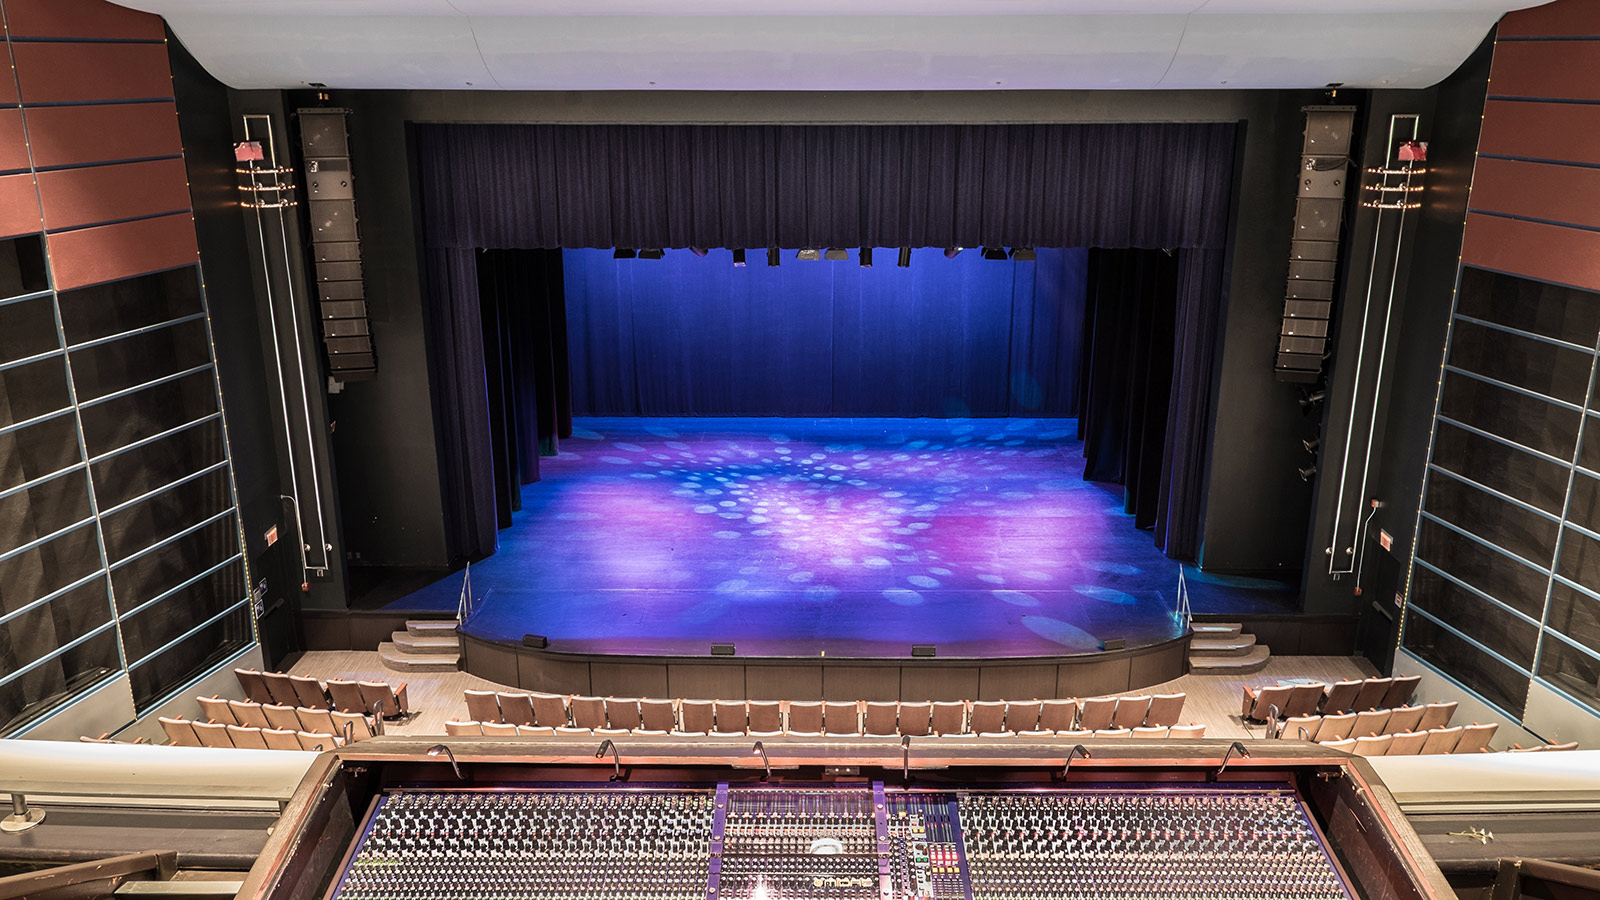 Centrepointe Theatre Upgrades with Canada's First Meyer Sound LEOPARD System